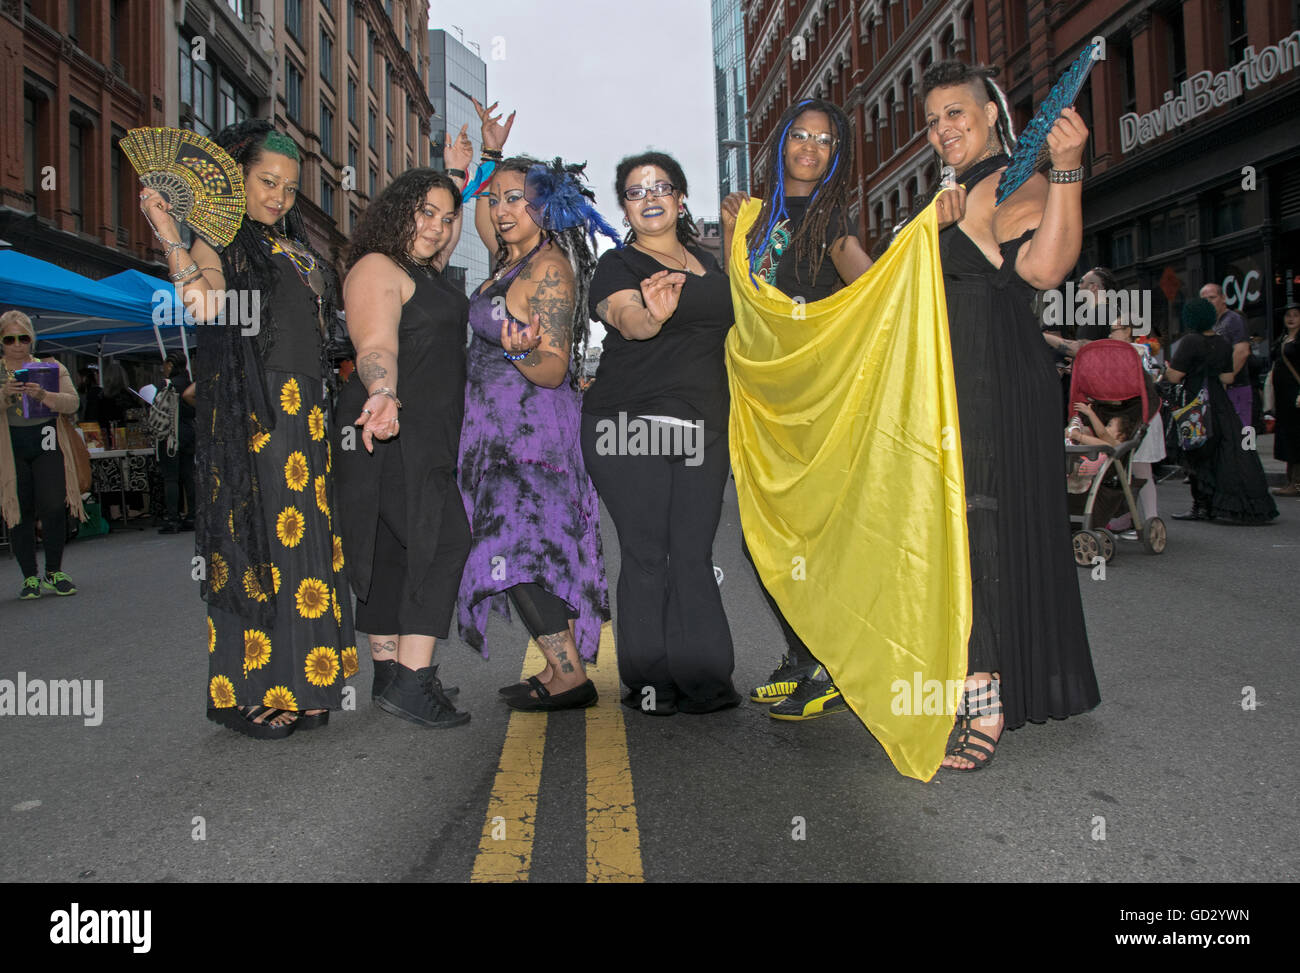 A group of women pose for a photo at Witchsfest 2016 on Astor Place in Greenwich Village, Manhattan, New York City. Stock Photo